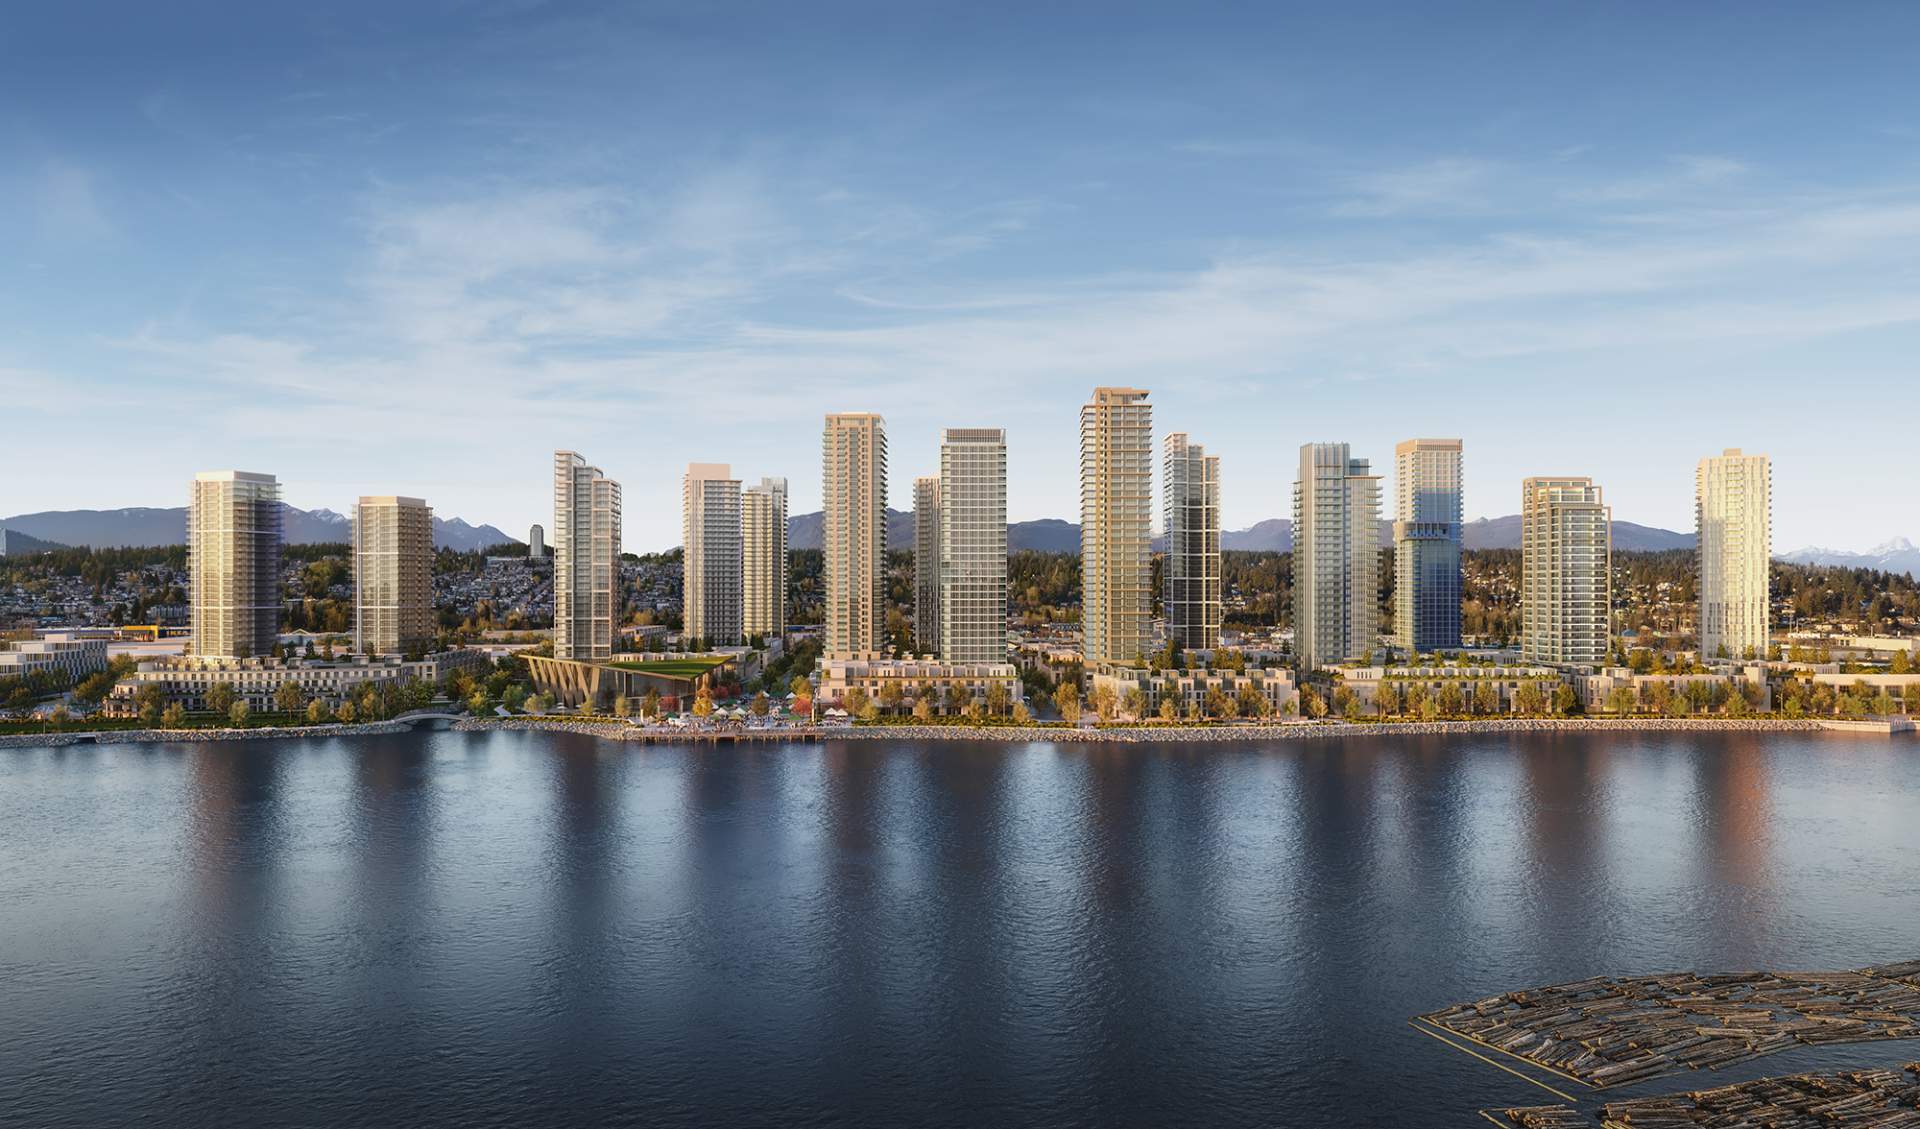 Fraser Milles - Coquitlam's only waterfront community will offer 5,500 new homes in 20 buildings.